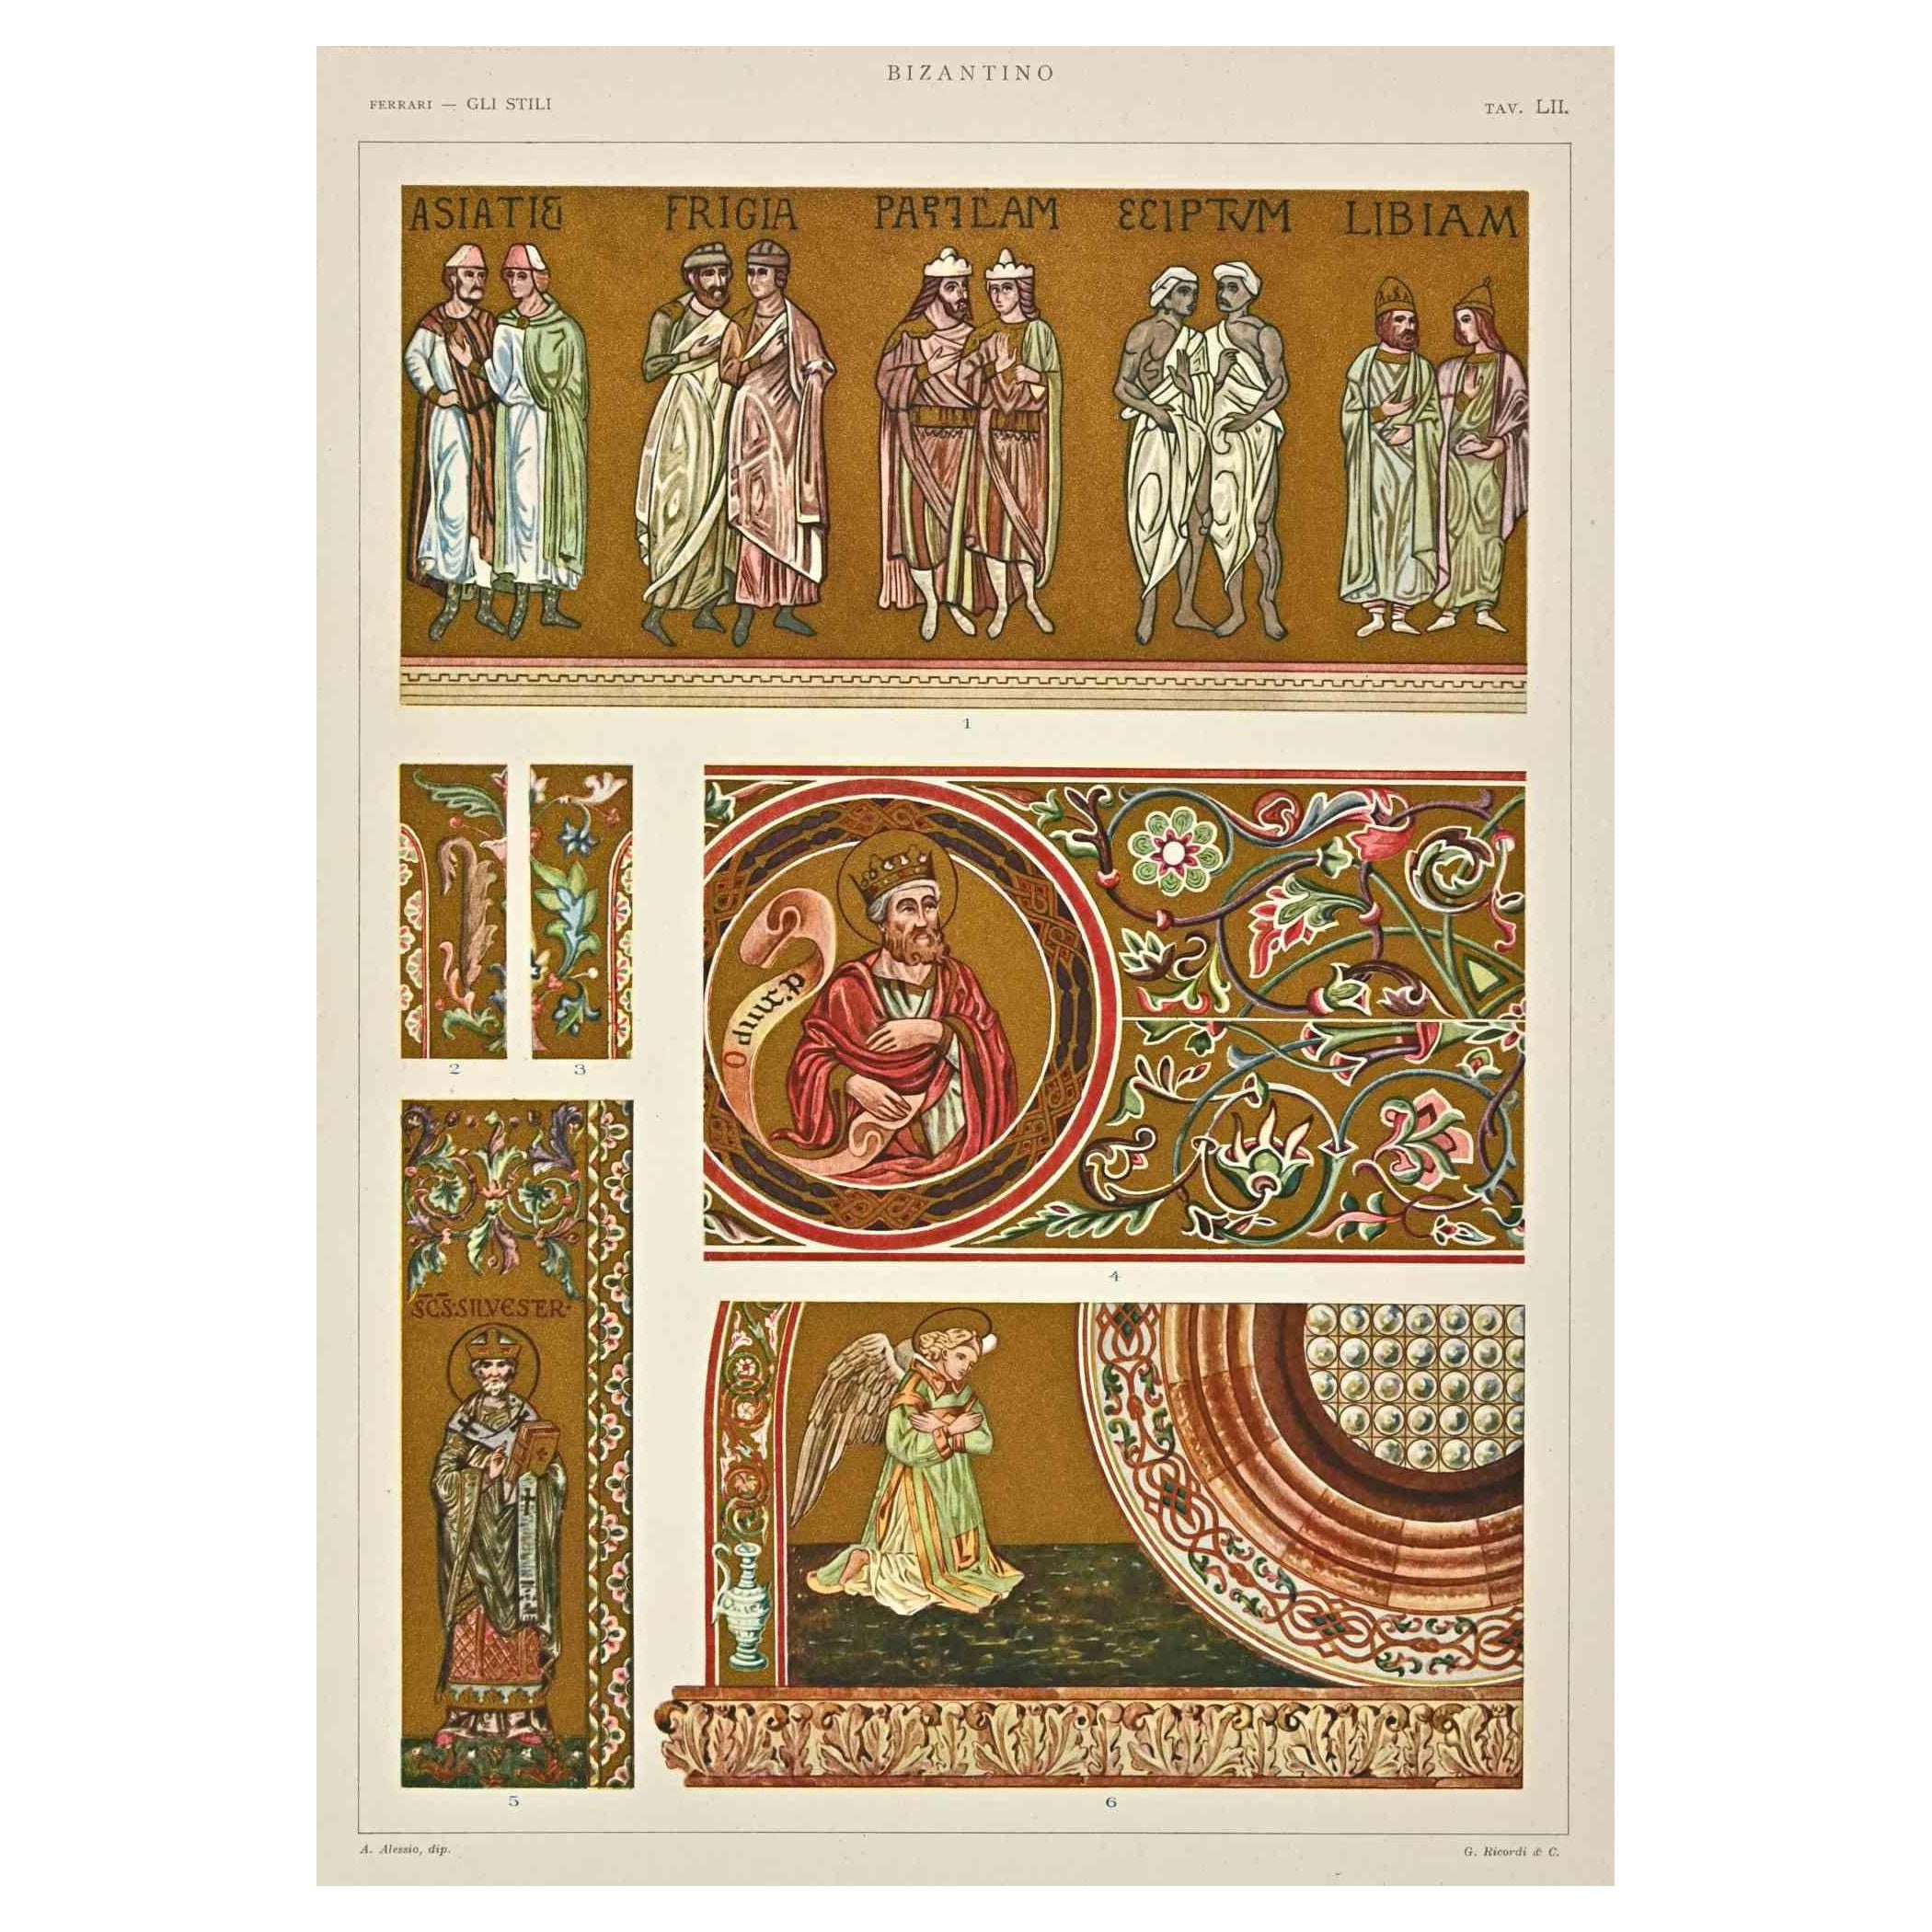 Byzantine  Decorative Style is a print on ivory-colored paper realized by Andrea Alessio in the early 20th Century.

Signed on the plate on the lower.

Vintage Chromolithograph.

Very good conditions.

The artwork represents Decorative motifs